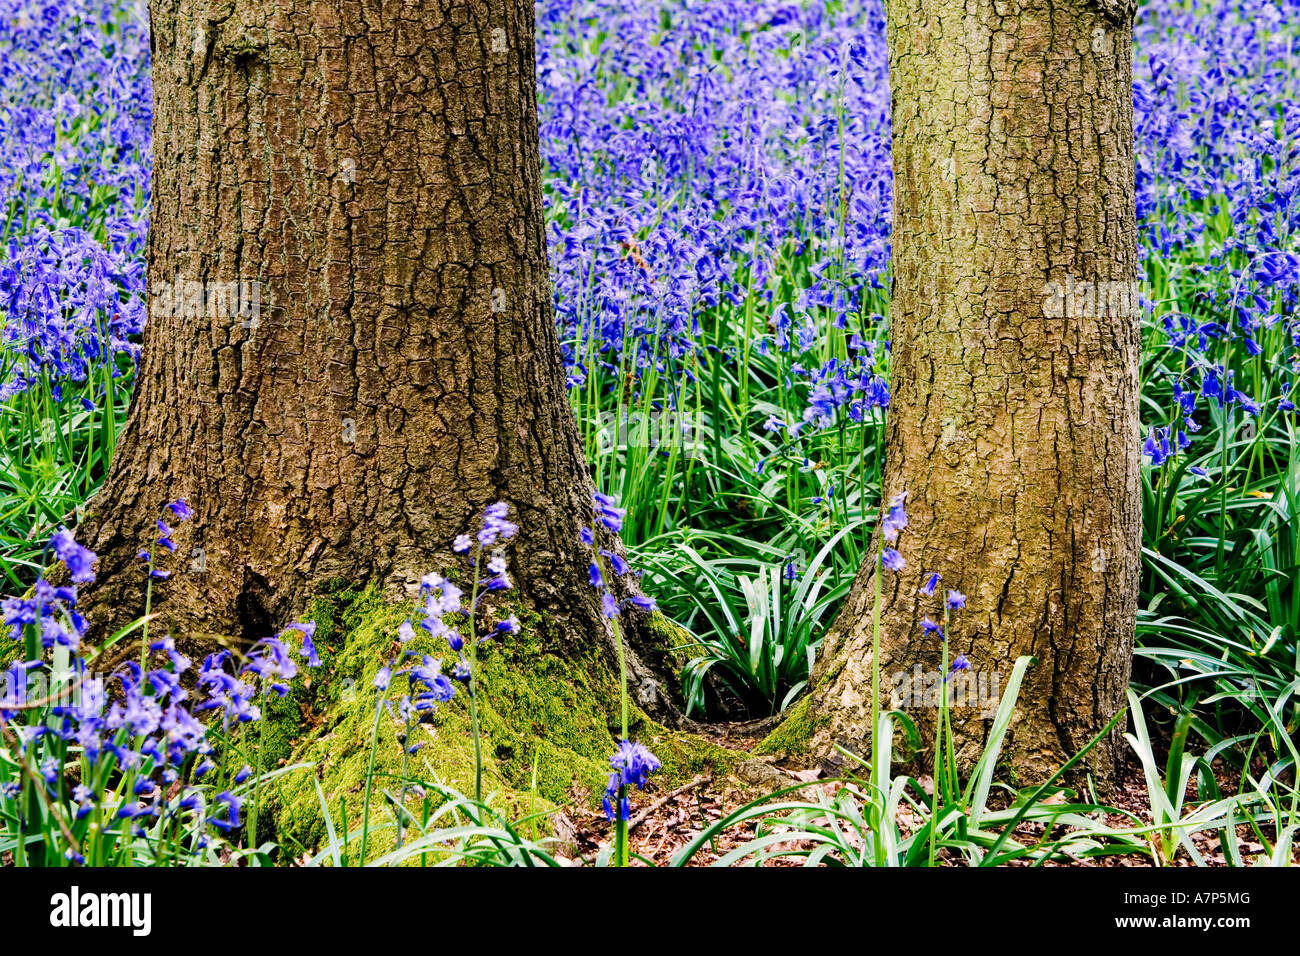 Bluebells in Hagbourne Copse. Hyacinthoides non-scripta also known as Wild hyacinth Stock Photo